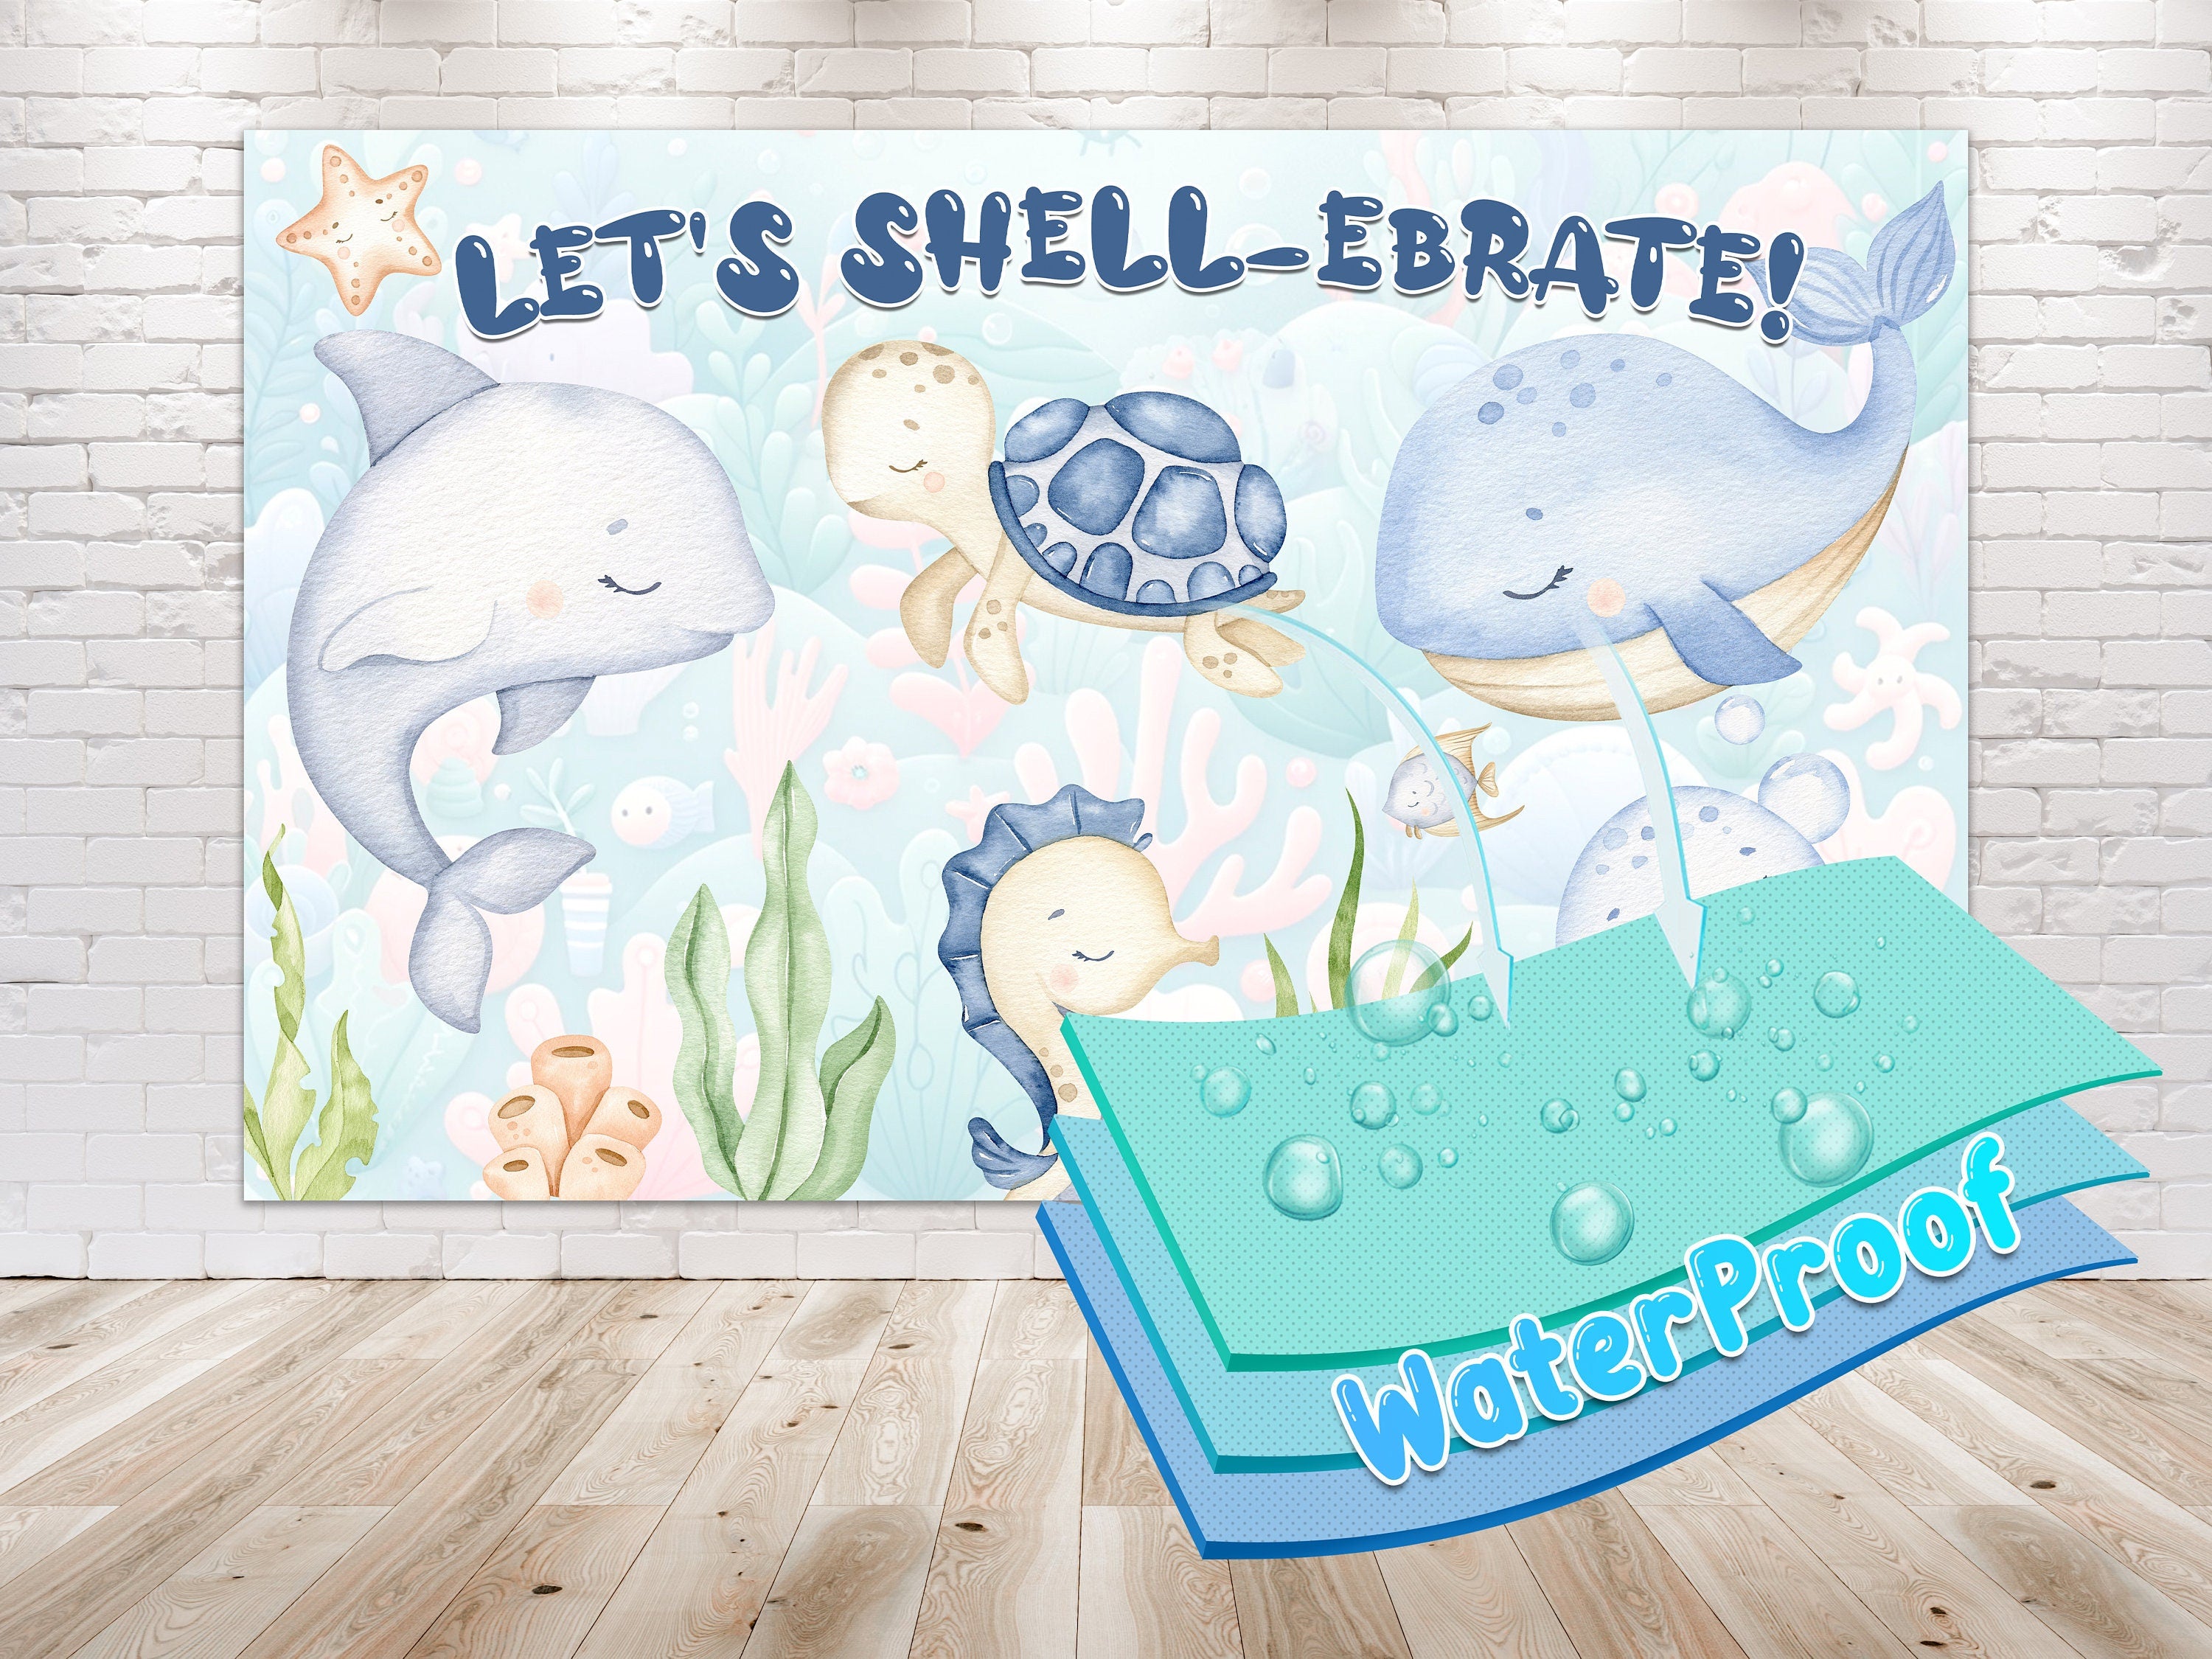 Let's Shell-ebrate! Under The Sea Birthday Backdrop 5x3 FT - Ocean Theme Party